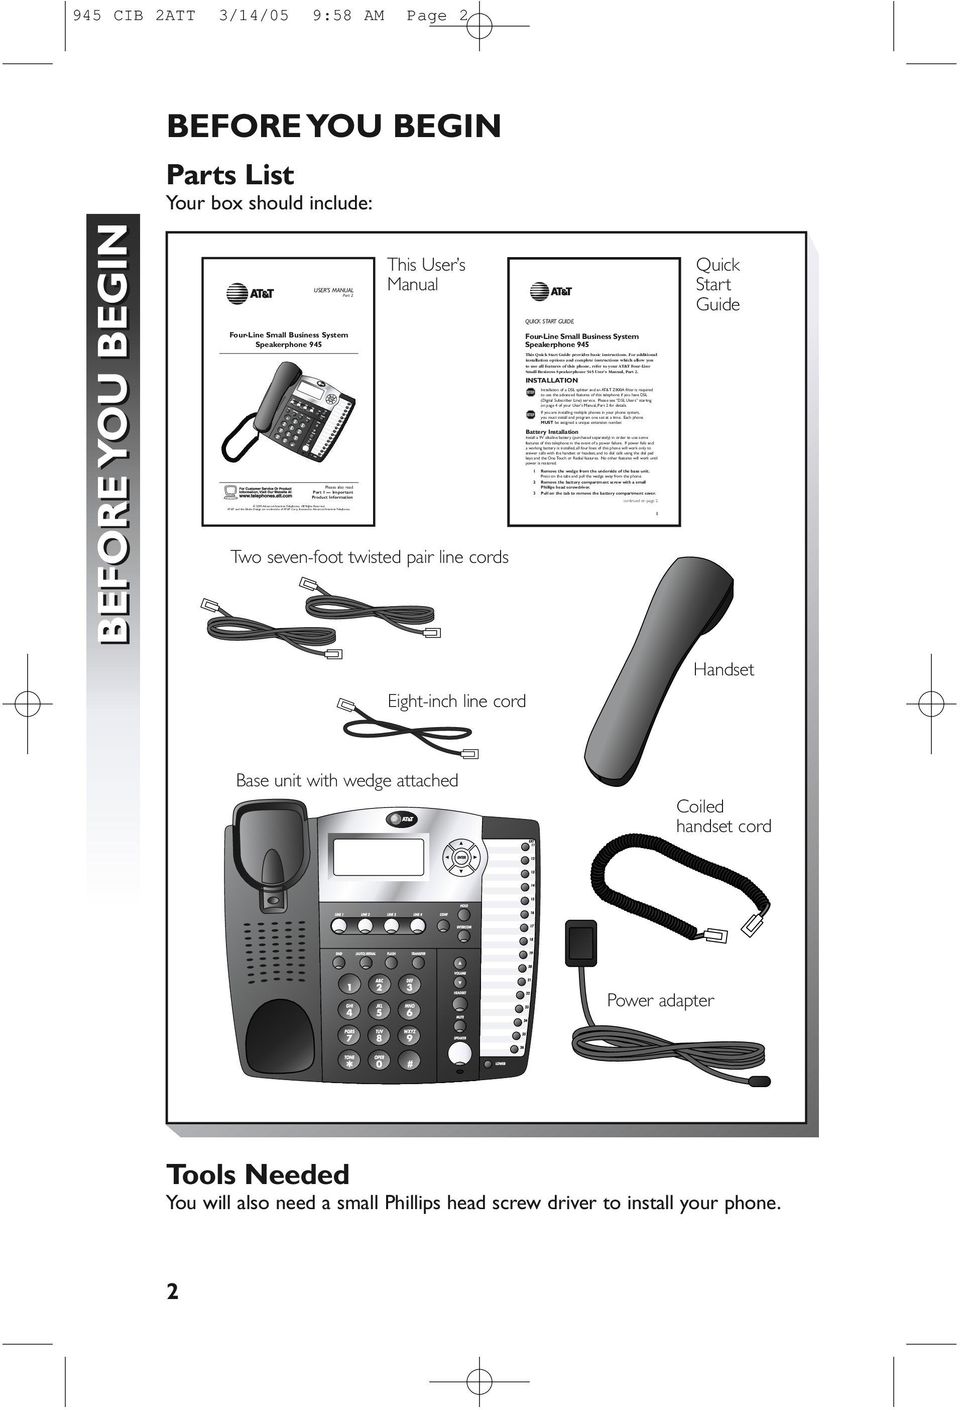 Important Product Information This User s Manual Two seven-foot twisted pair line cords QUICK START GUIDE Four-Line Small Business System Speakerphone 945 This Quick Start Guide provides basic